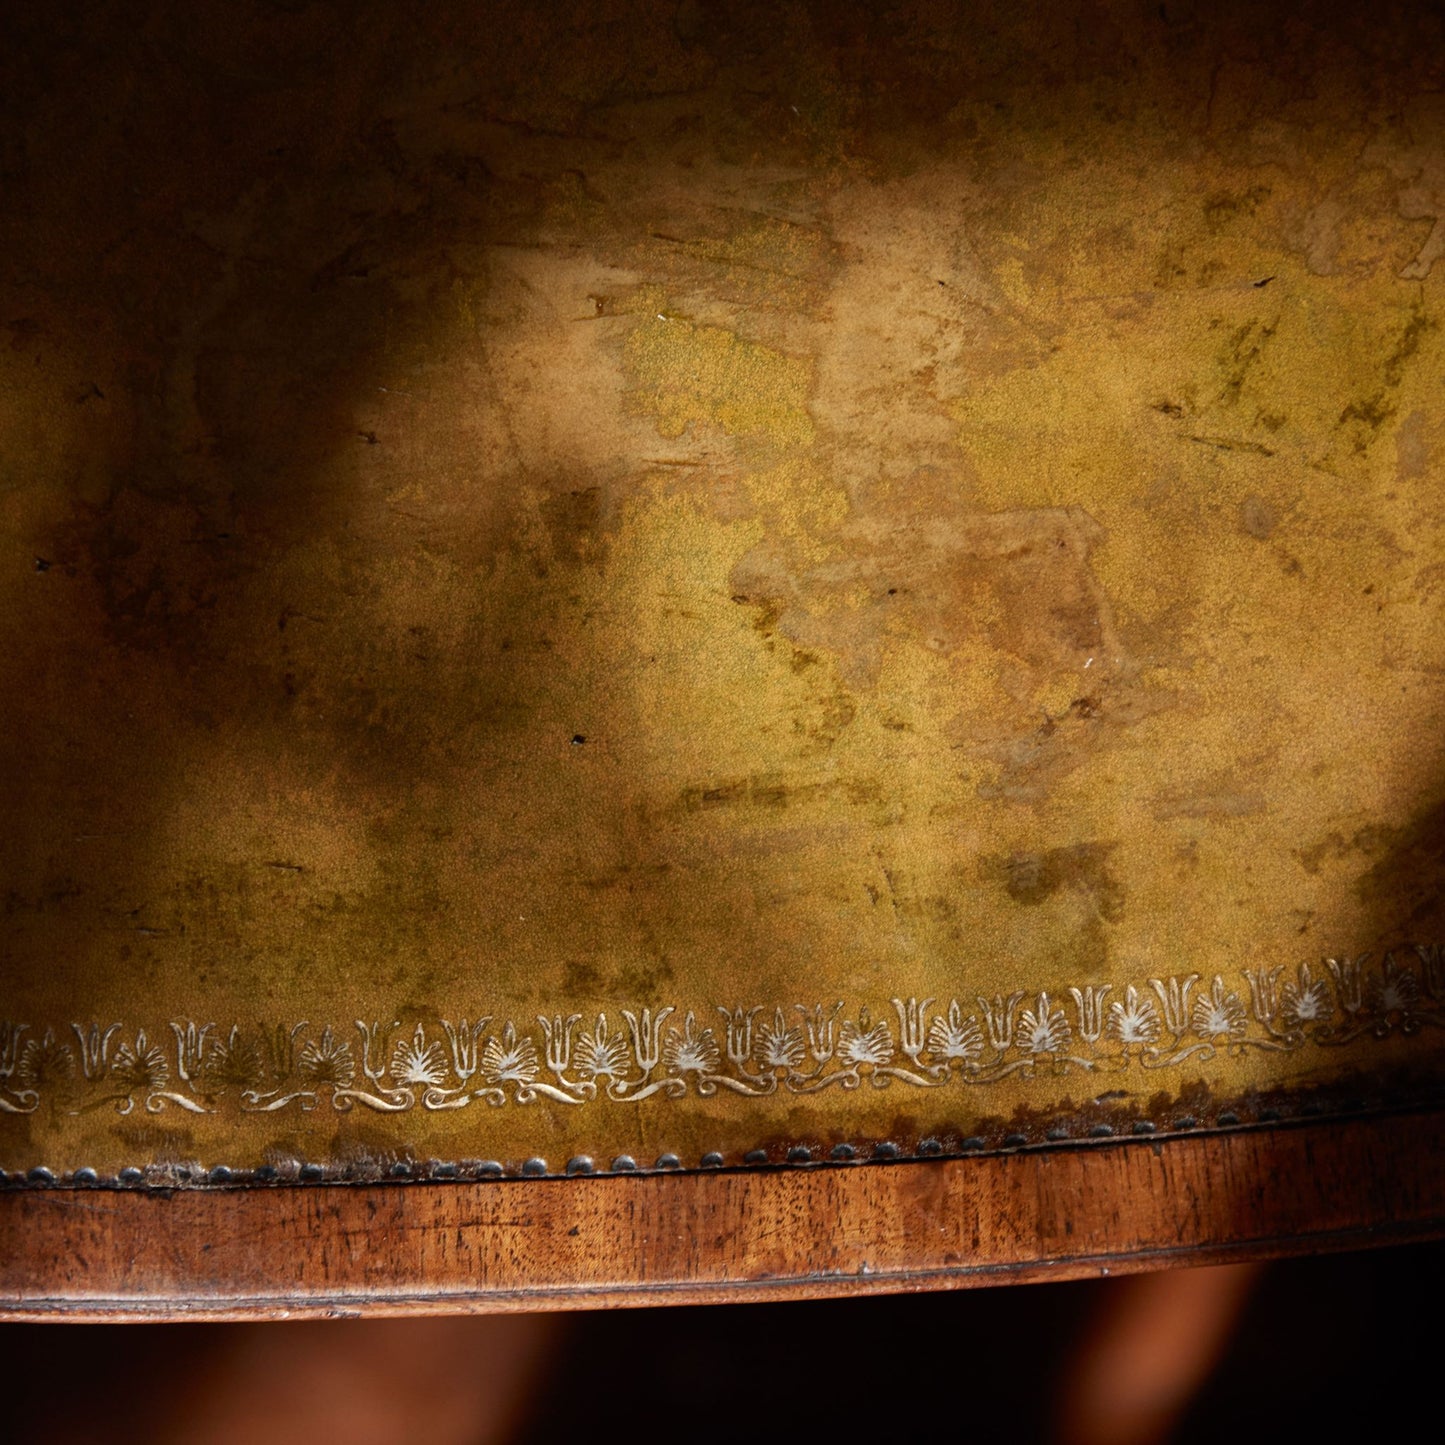 A stunning and rare George III library table, circa 1810, with original leather top with a magnificent, verdigris-like patina. A pair of frieze drawers to the front with false drawers on the reverse, over a beautifully arched crossband down to divided legs, each with a decorative scroll detailing, on period casters. The drawers can be locked with a single key. With a gentle patina commensurate with age and use, in very good condition.